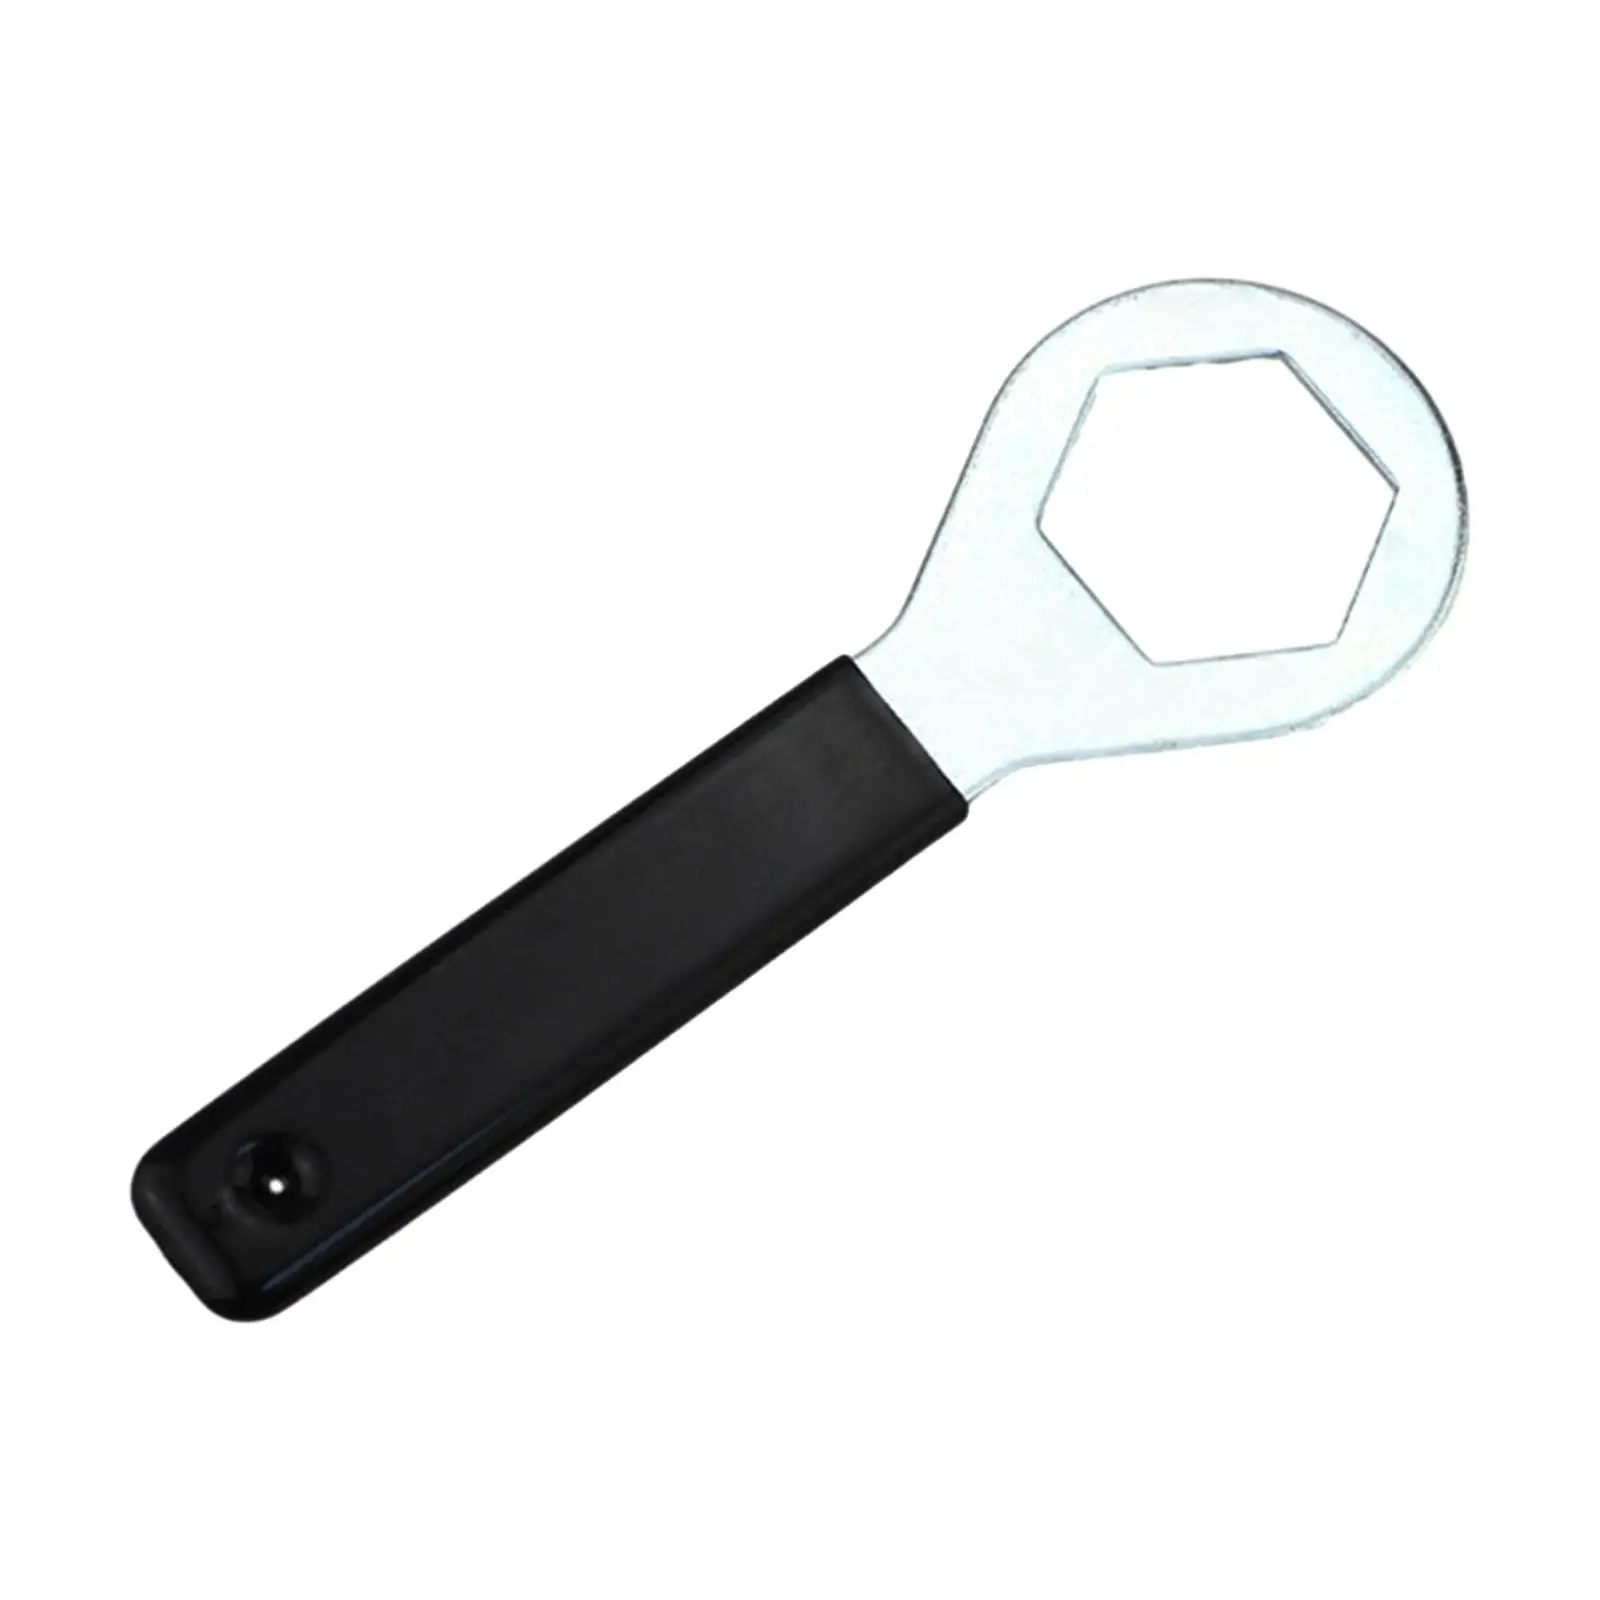 Fuel Filter Wrench Portable for Diesel Engines 6.6L 2001-2011